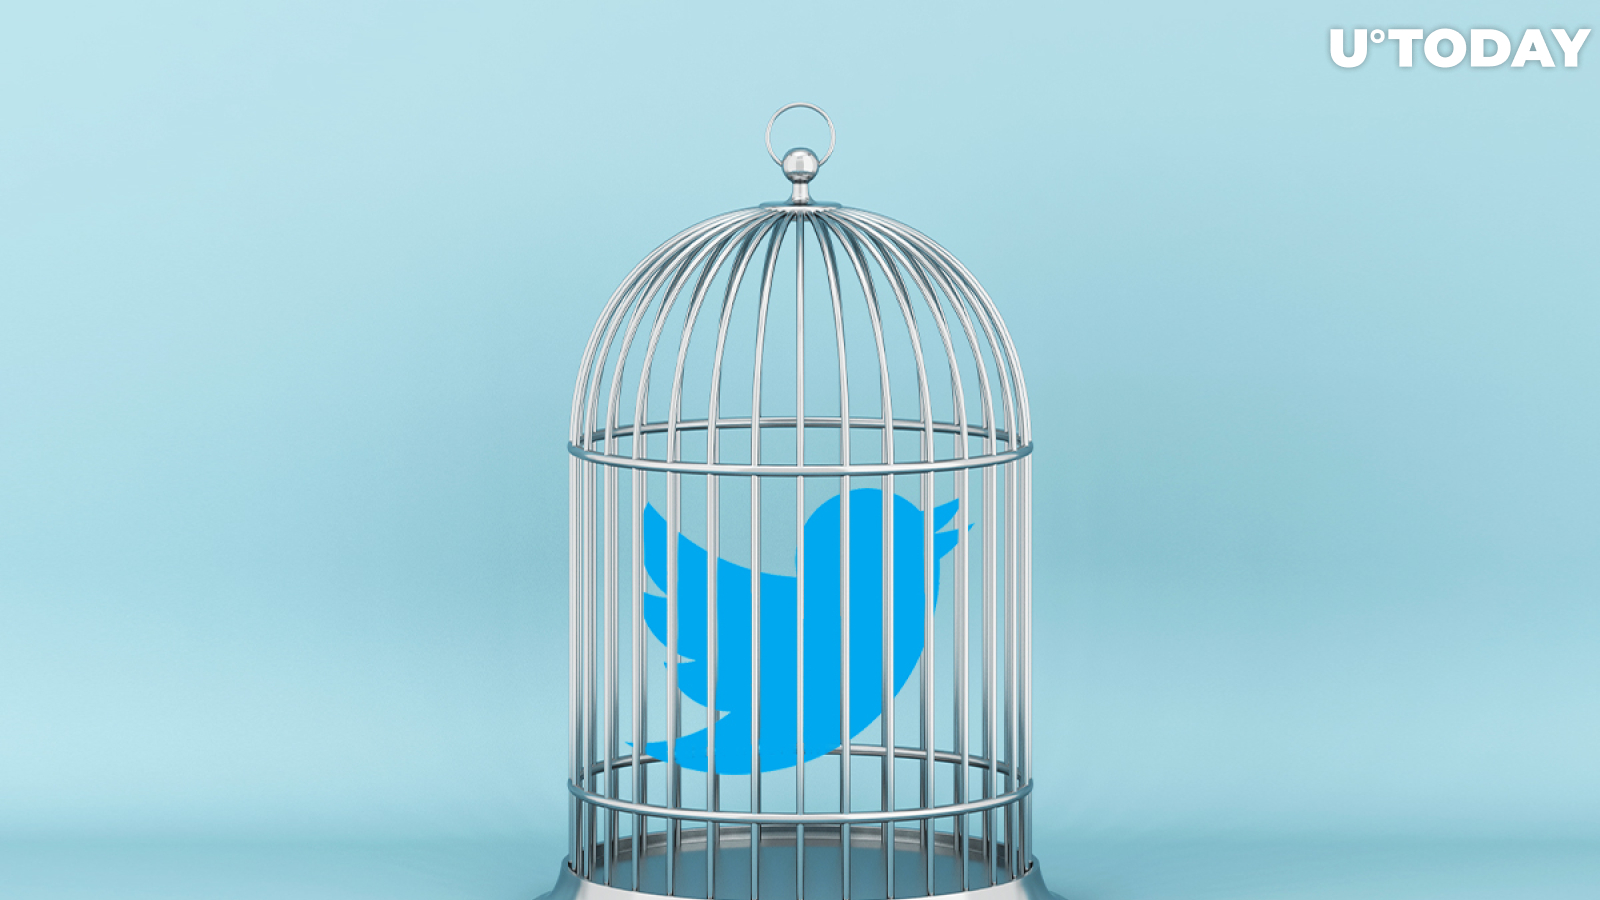 Twitter Suspends Accounts of PlanB, CryptoDog, and Other Crypto Influencers